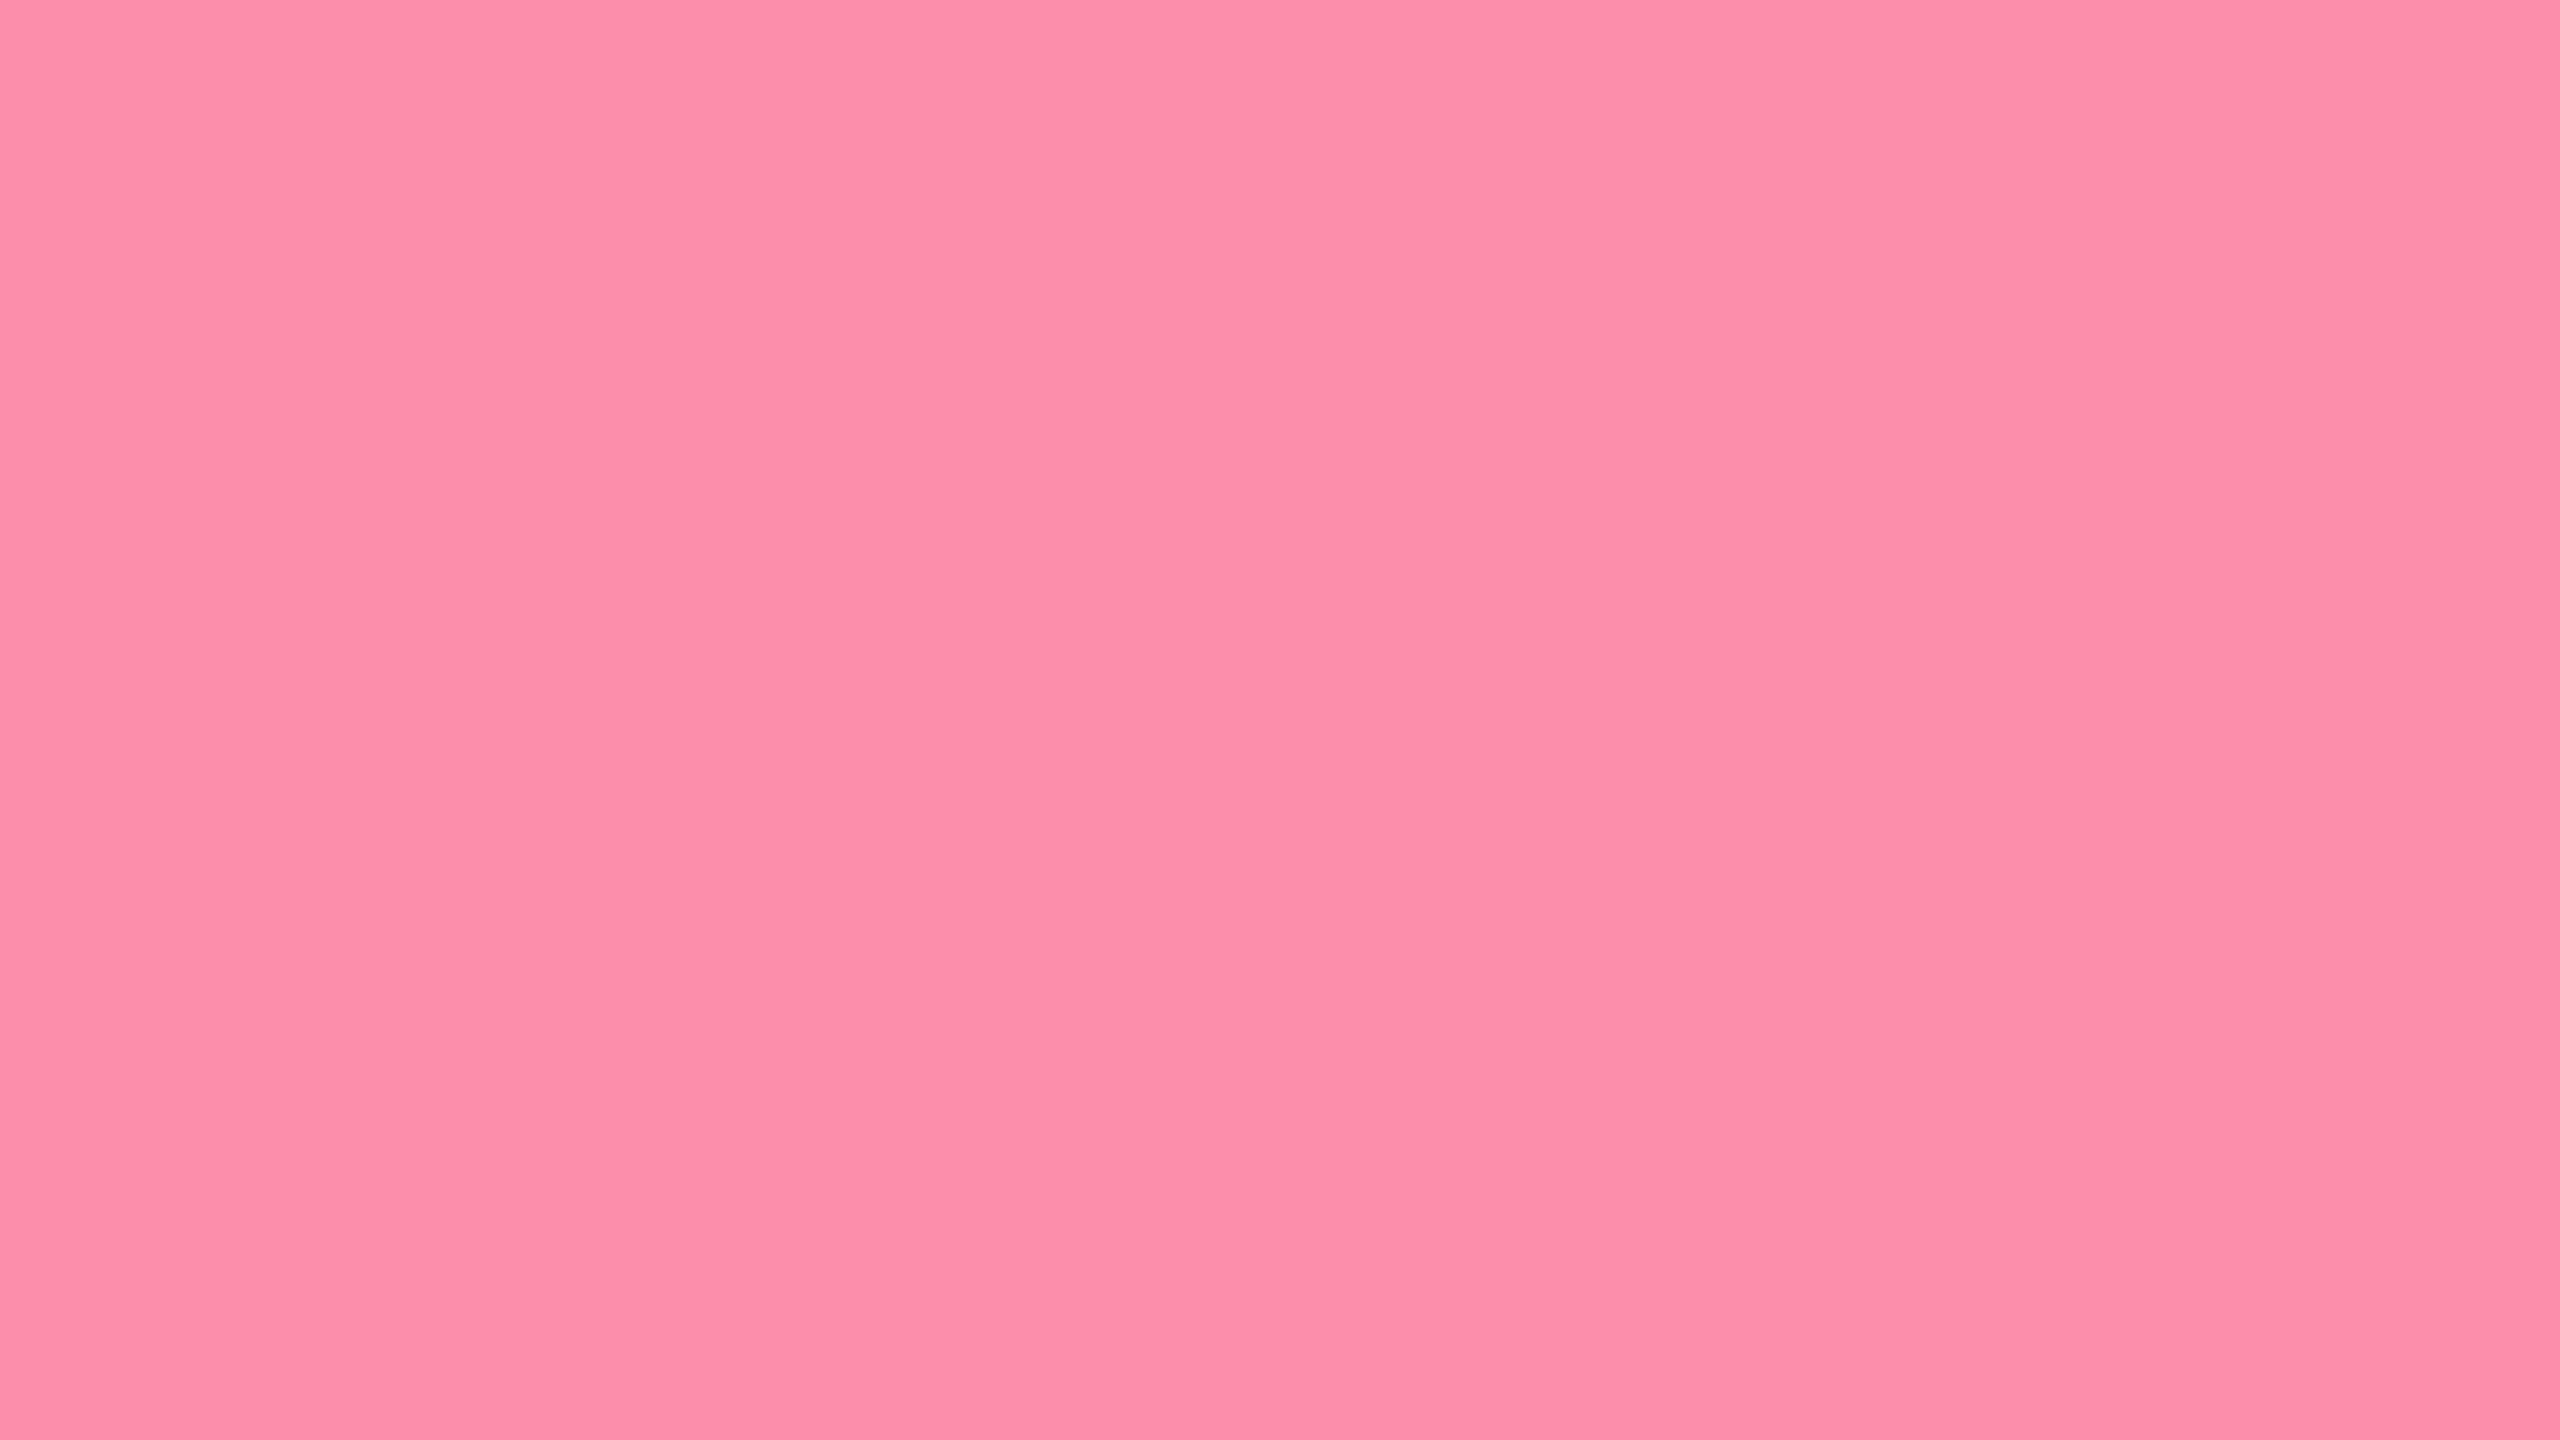 2560x1440 Flamingo Pink Solid Color Background